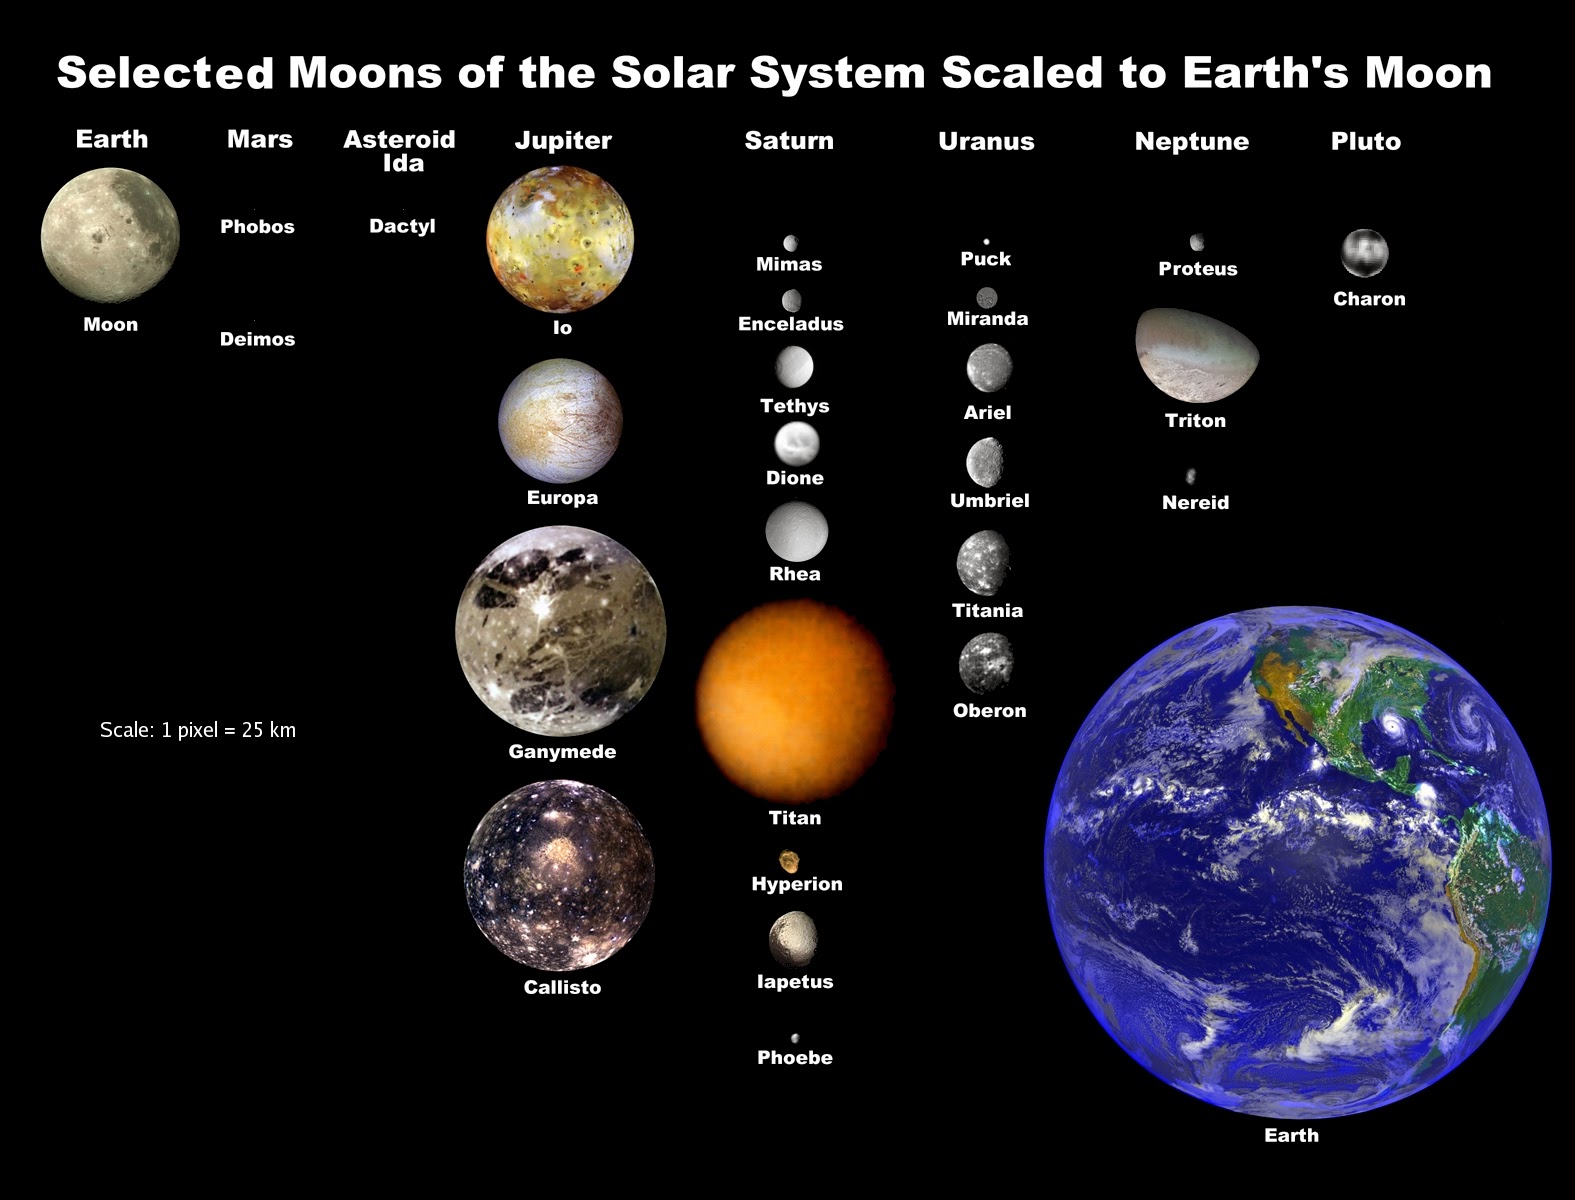 Moons of the solar system